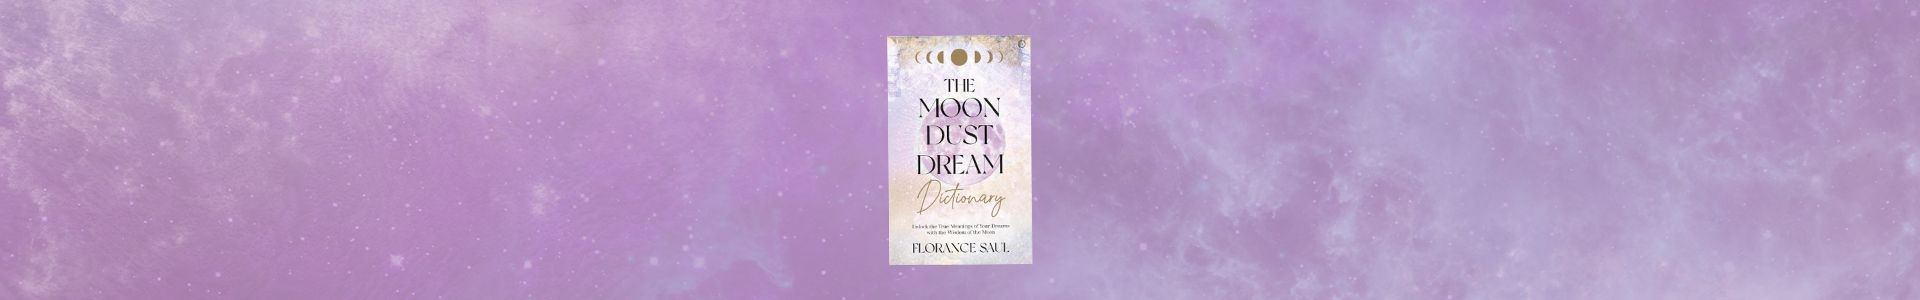 Moondust book on space background